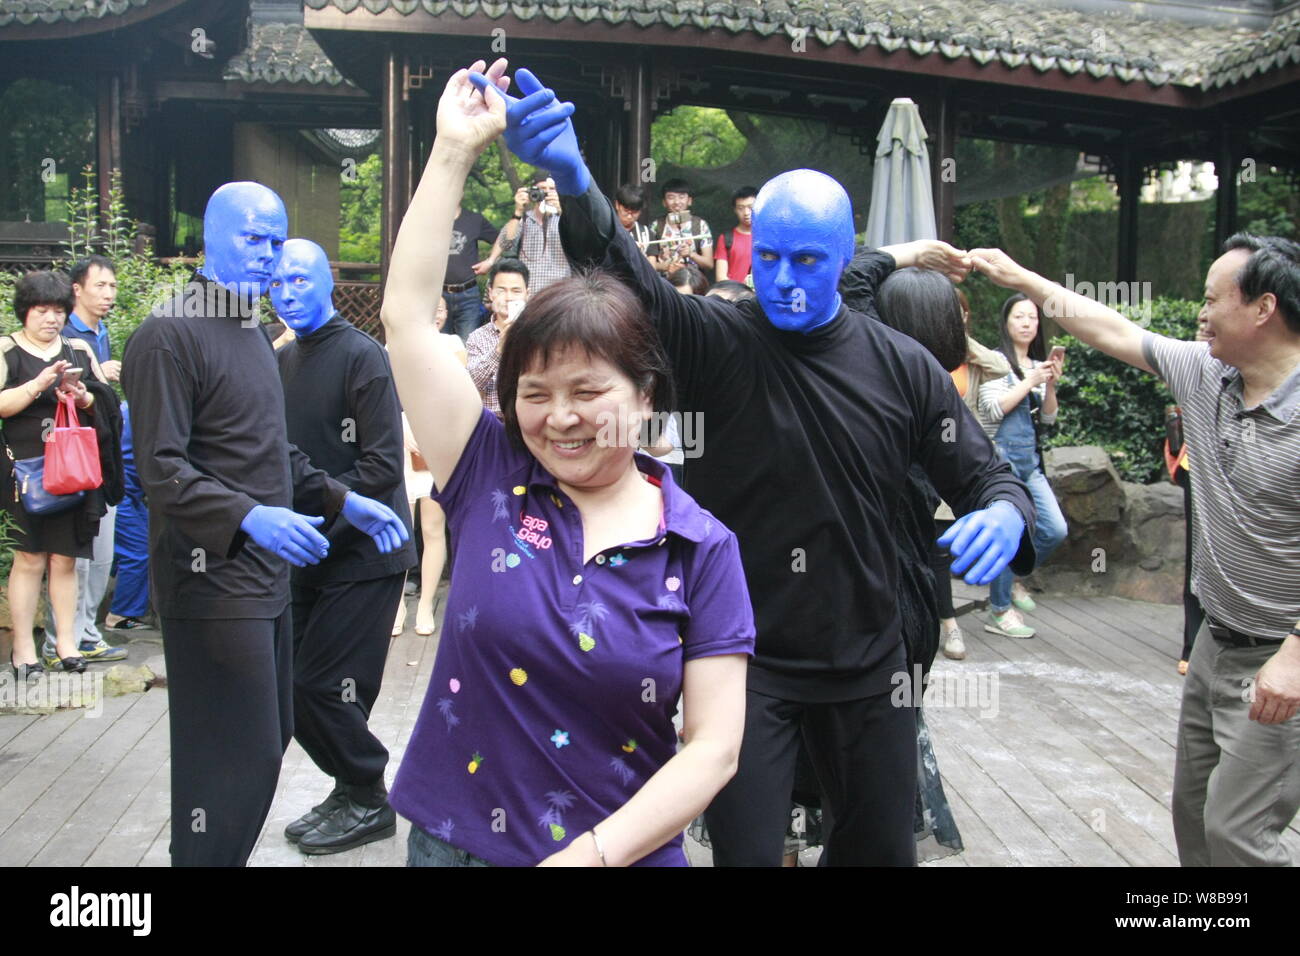 Performers from the Blue Man Group dance with visitors near the Broken Bridge on the West Lake during a flash mob event in Hangzhou city, east China's Stock Photo